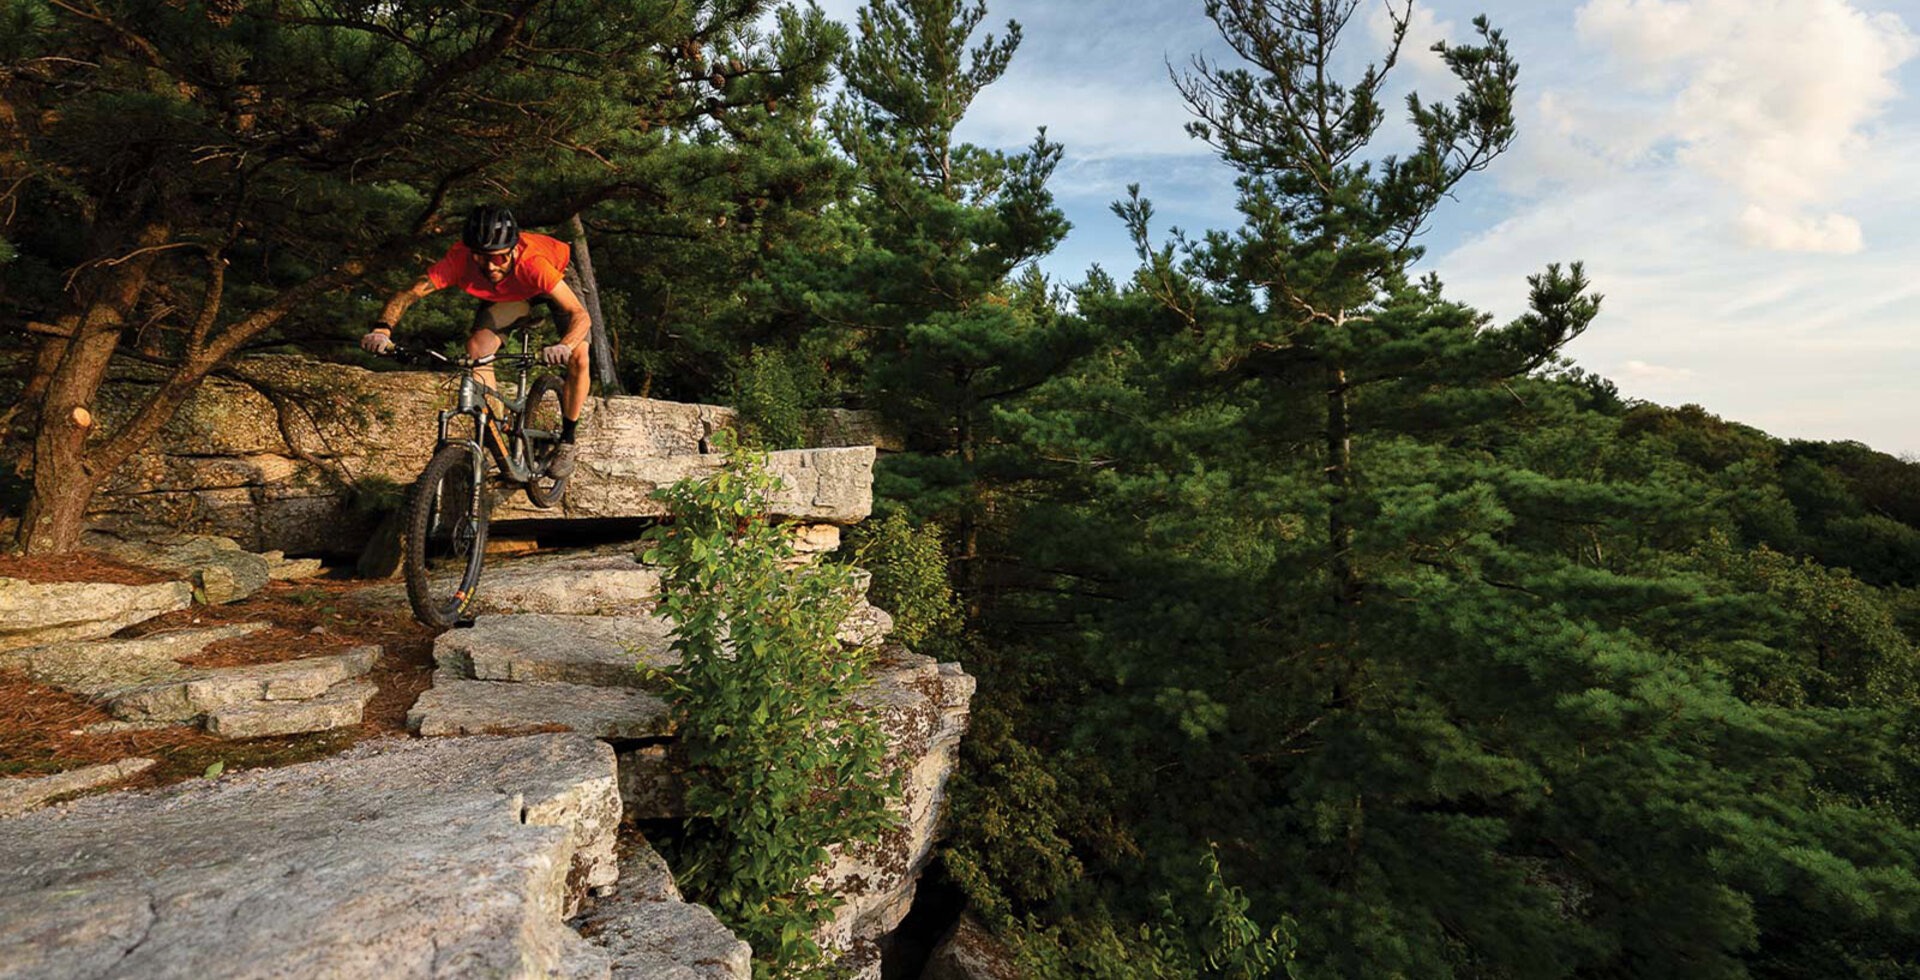 Harrisonburg’s abundance of technical terrain breeds a certain type of rider. Charlie Snyder drops into the overlook on Bird Knob in the northeastern quadrant of the George Washington National Forest.